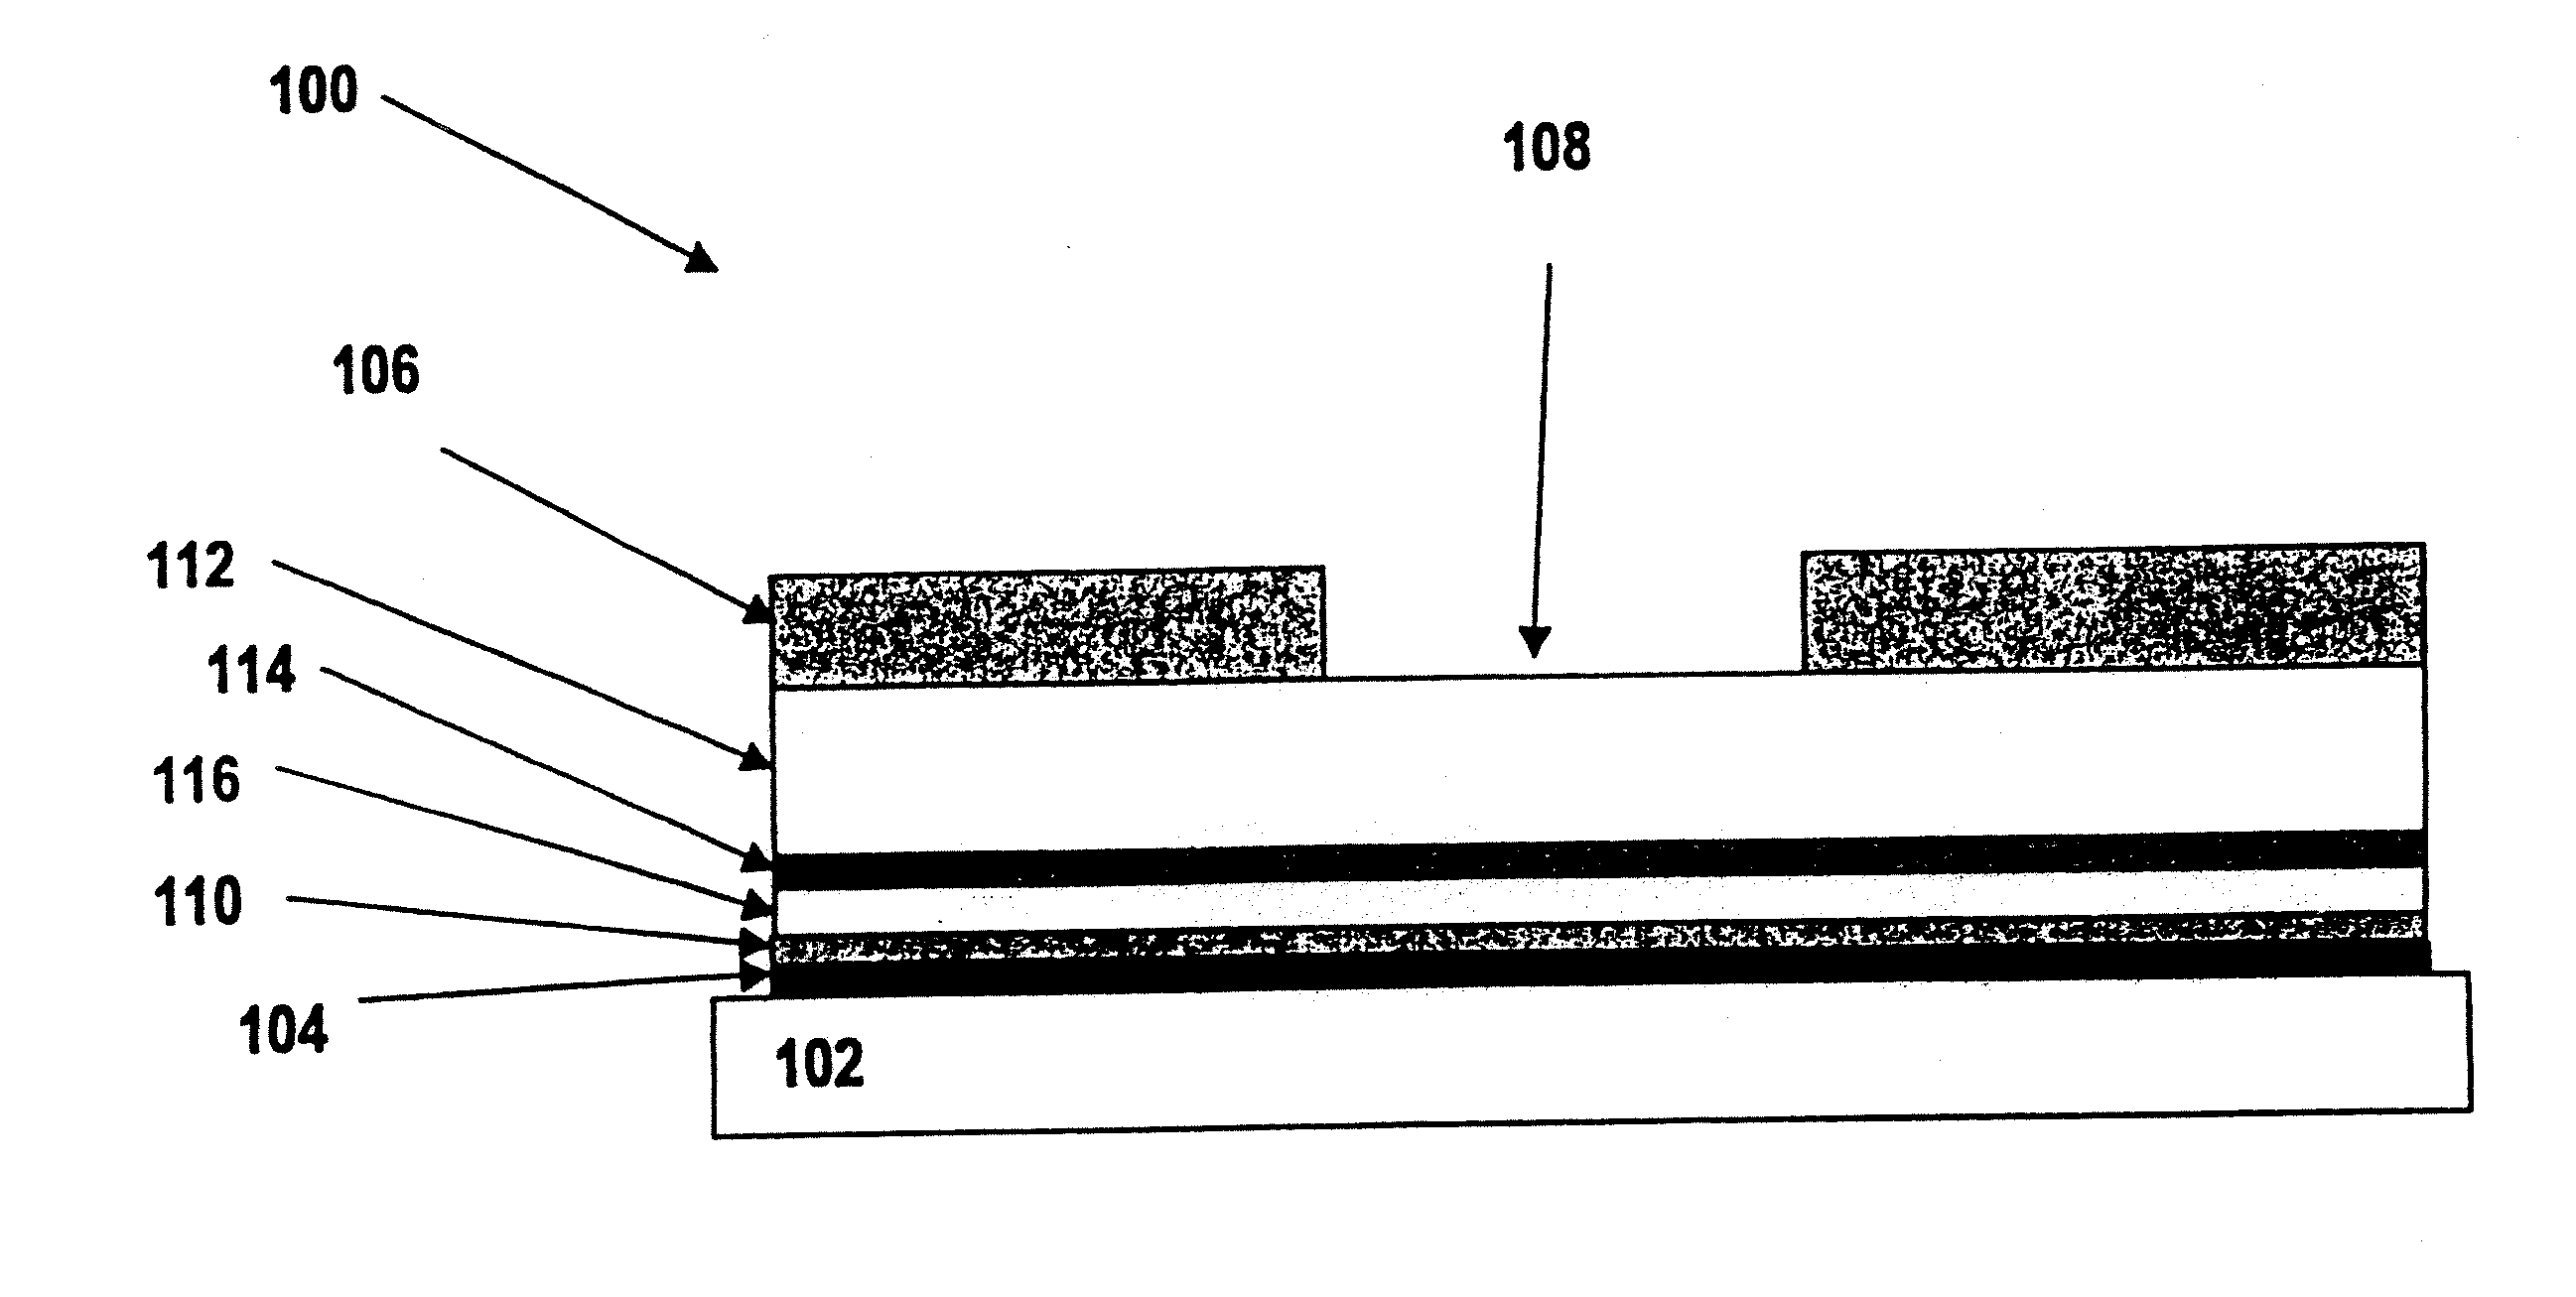 Analyte sensor apparatuses having interference rejection membranes and methods for making and using them